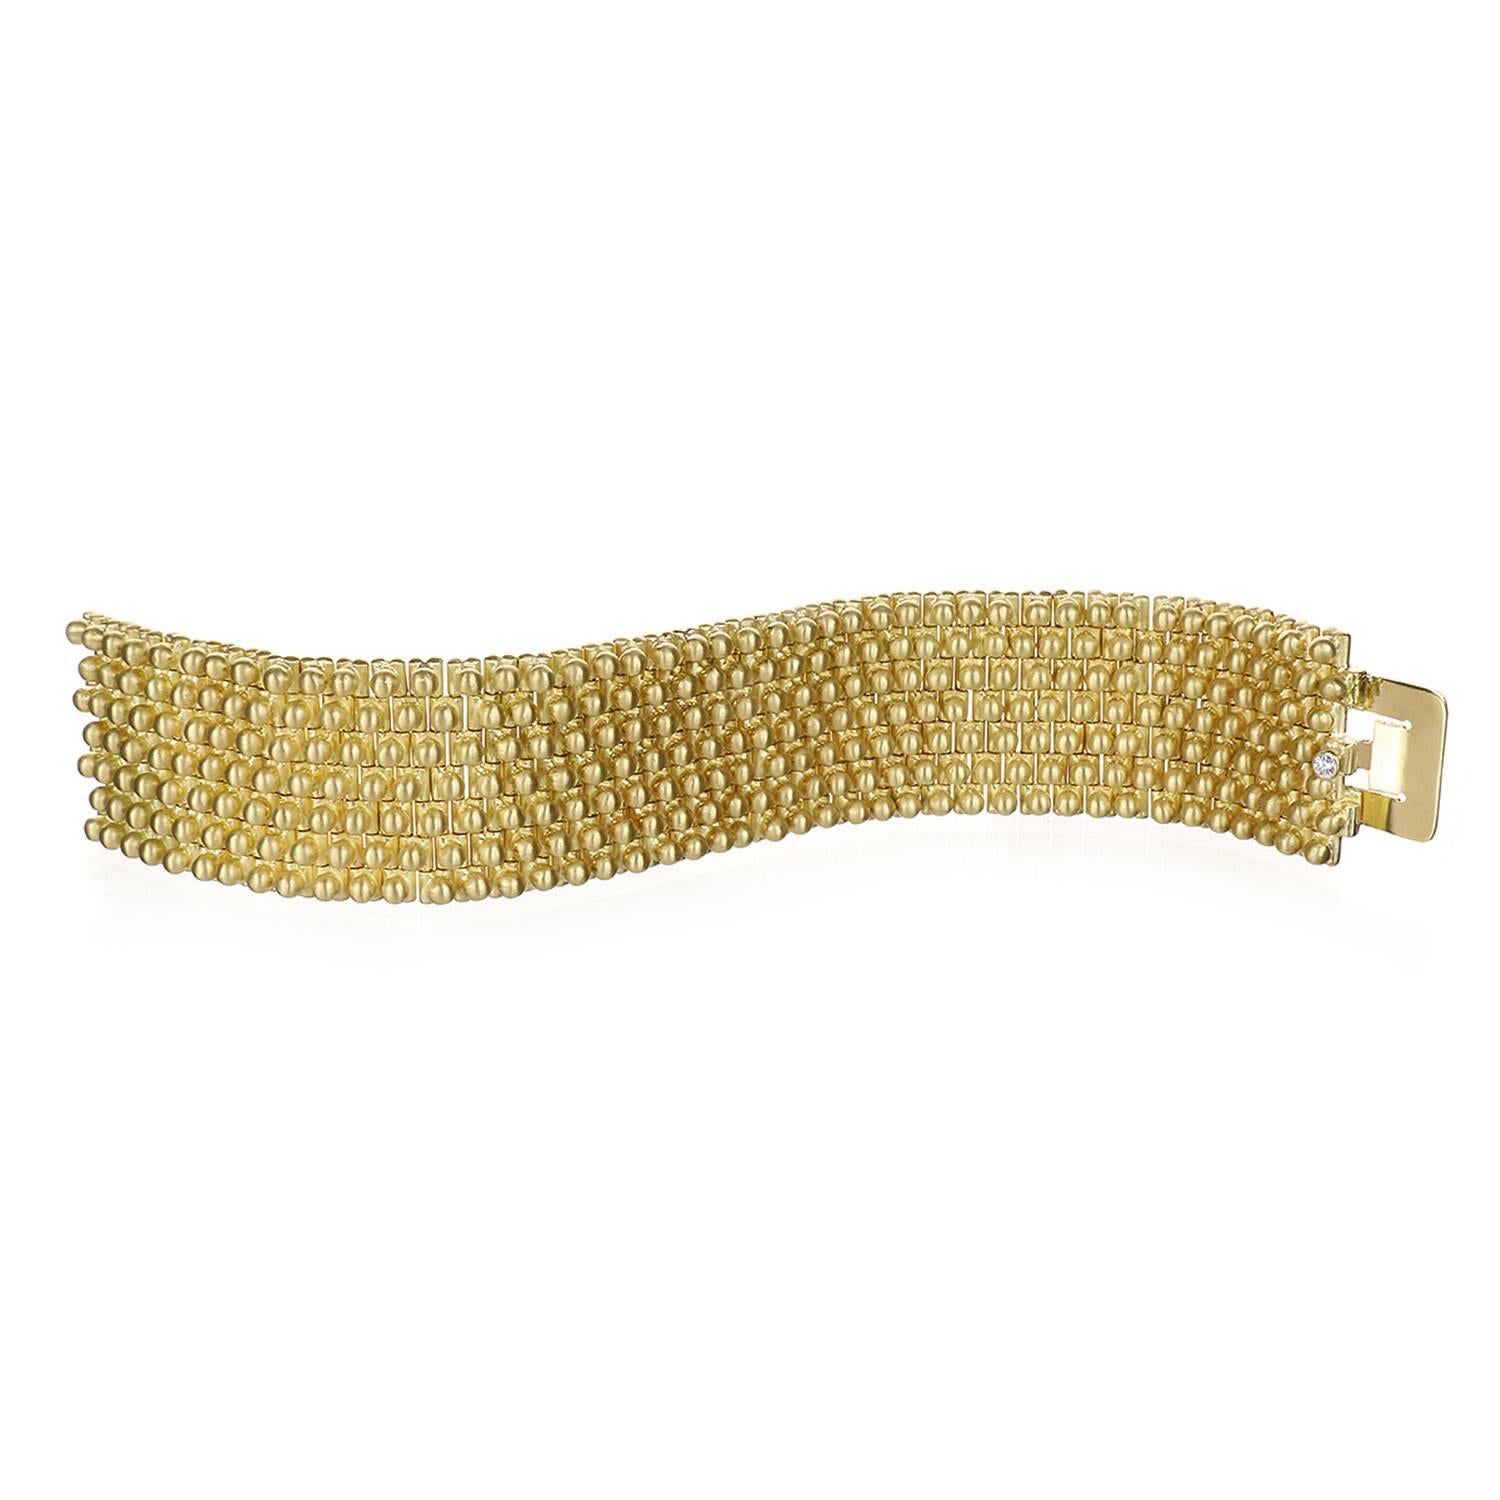 Faye Kim has gone above and beyond in creating this showstopper handmade flexible link cuff bracelet in 18K gold.  The weight of this piece is not to be believed and will always be appreciated by the lucky owner.  The bracelet is perfectly finished